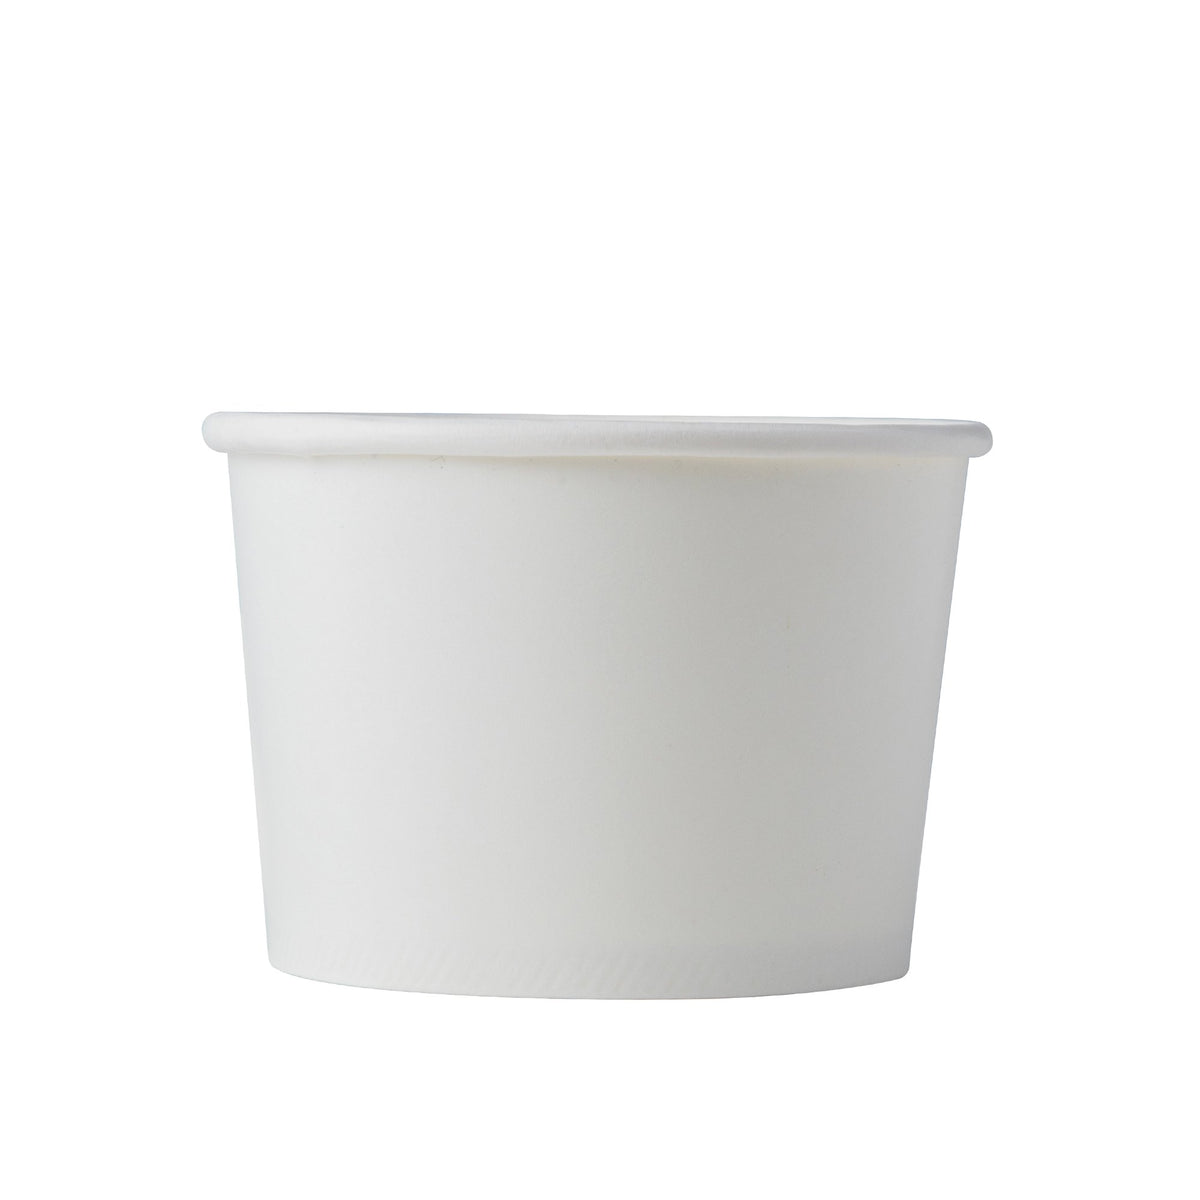 16oz Paper Cold Cup - White (90mm) - 1,000 ct